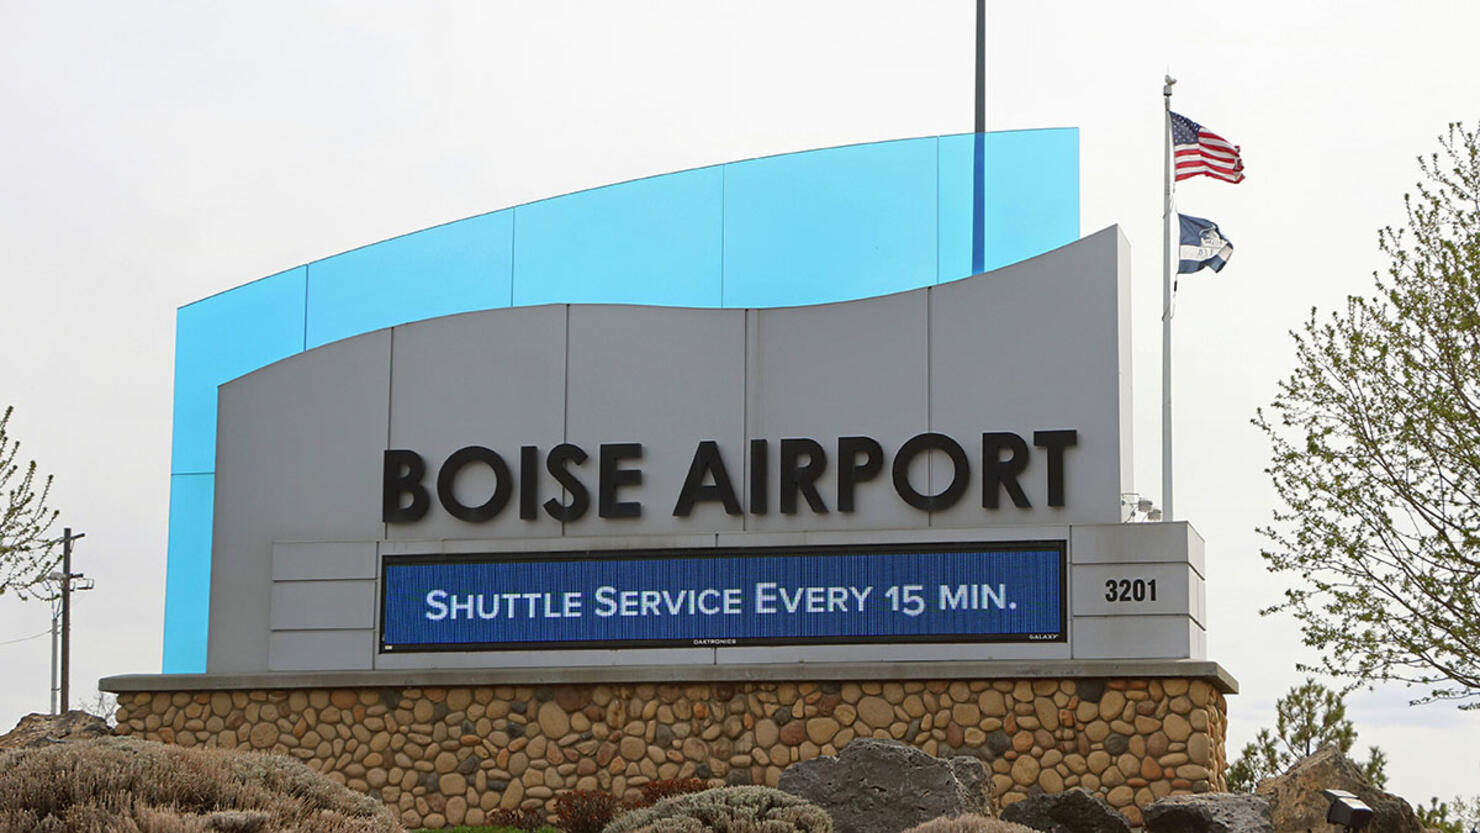 Hangar Collapse At Boise Airport Leaves Several Dead | iHeart